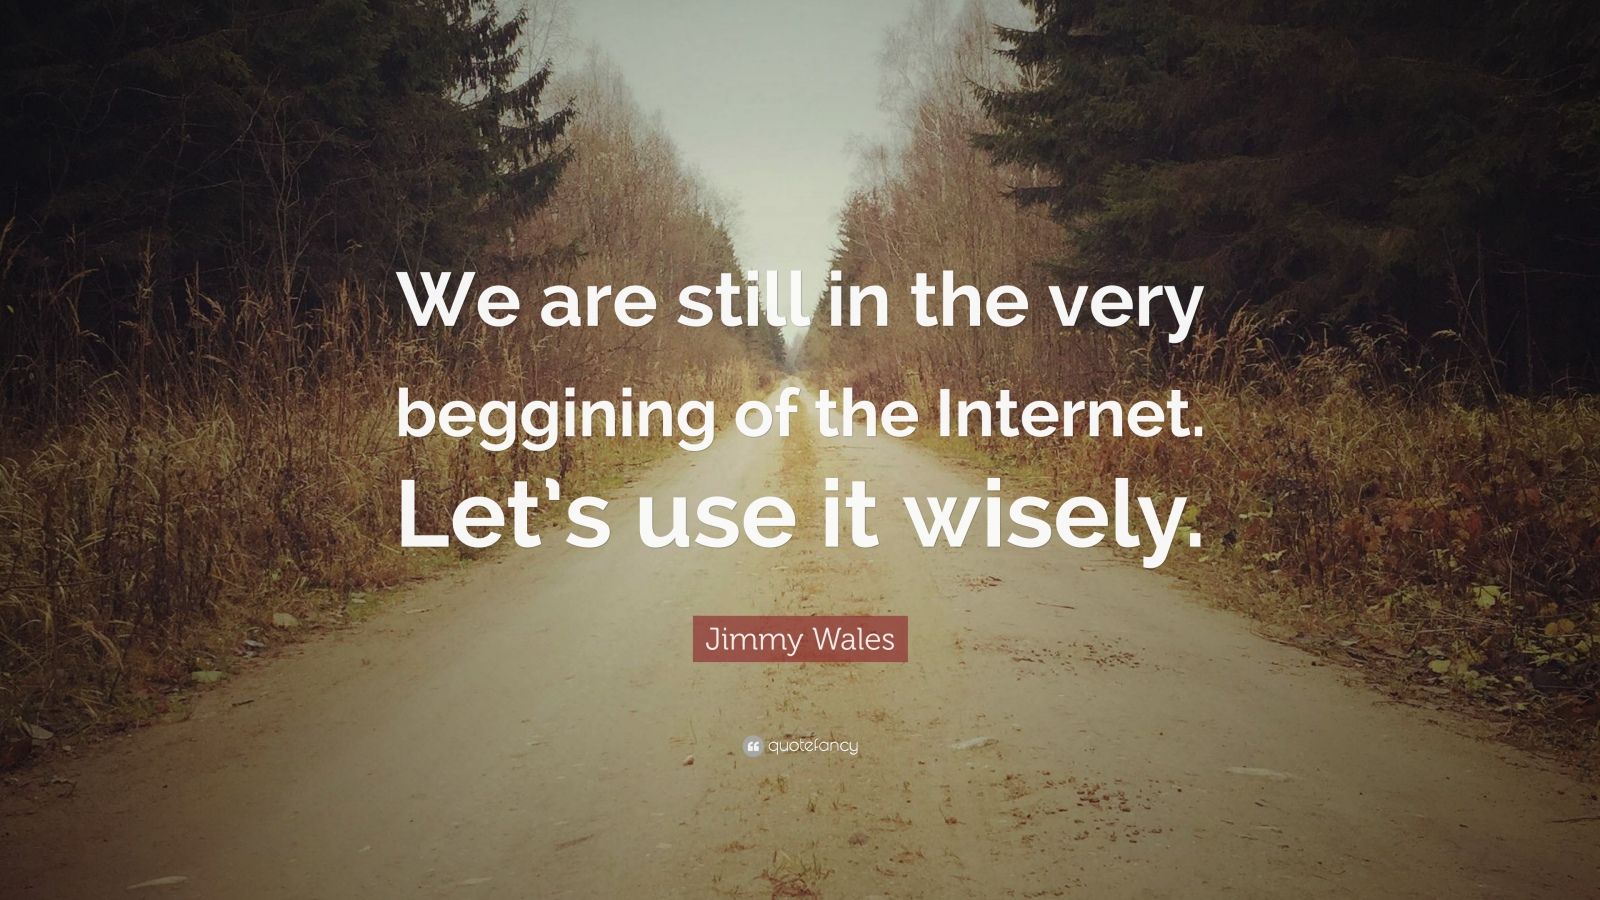 Jimmy Wales Quote: “We are still in the very beggining of the Internet